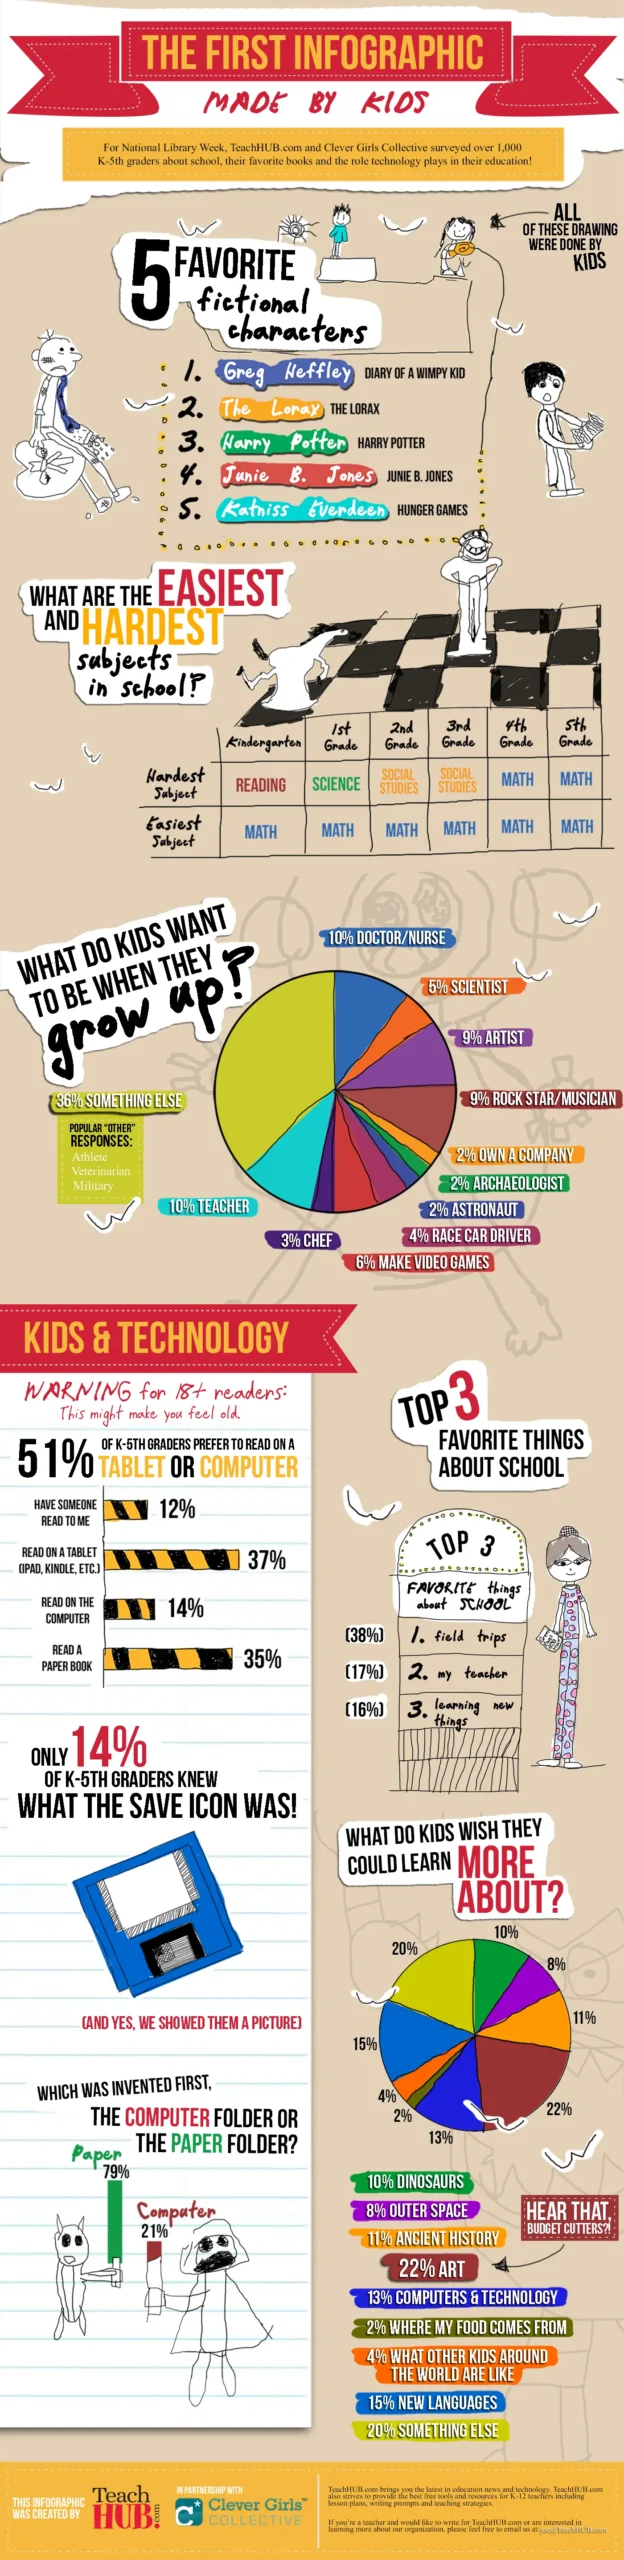 The First Infographic Created By Kids [InfoGraphic]
